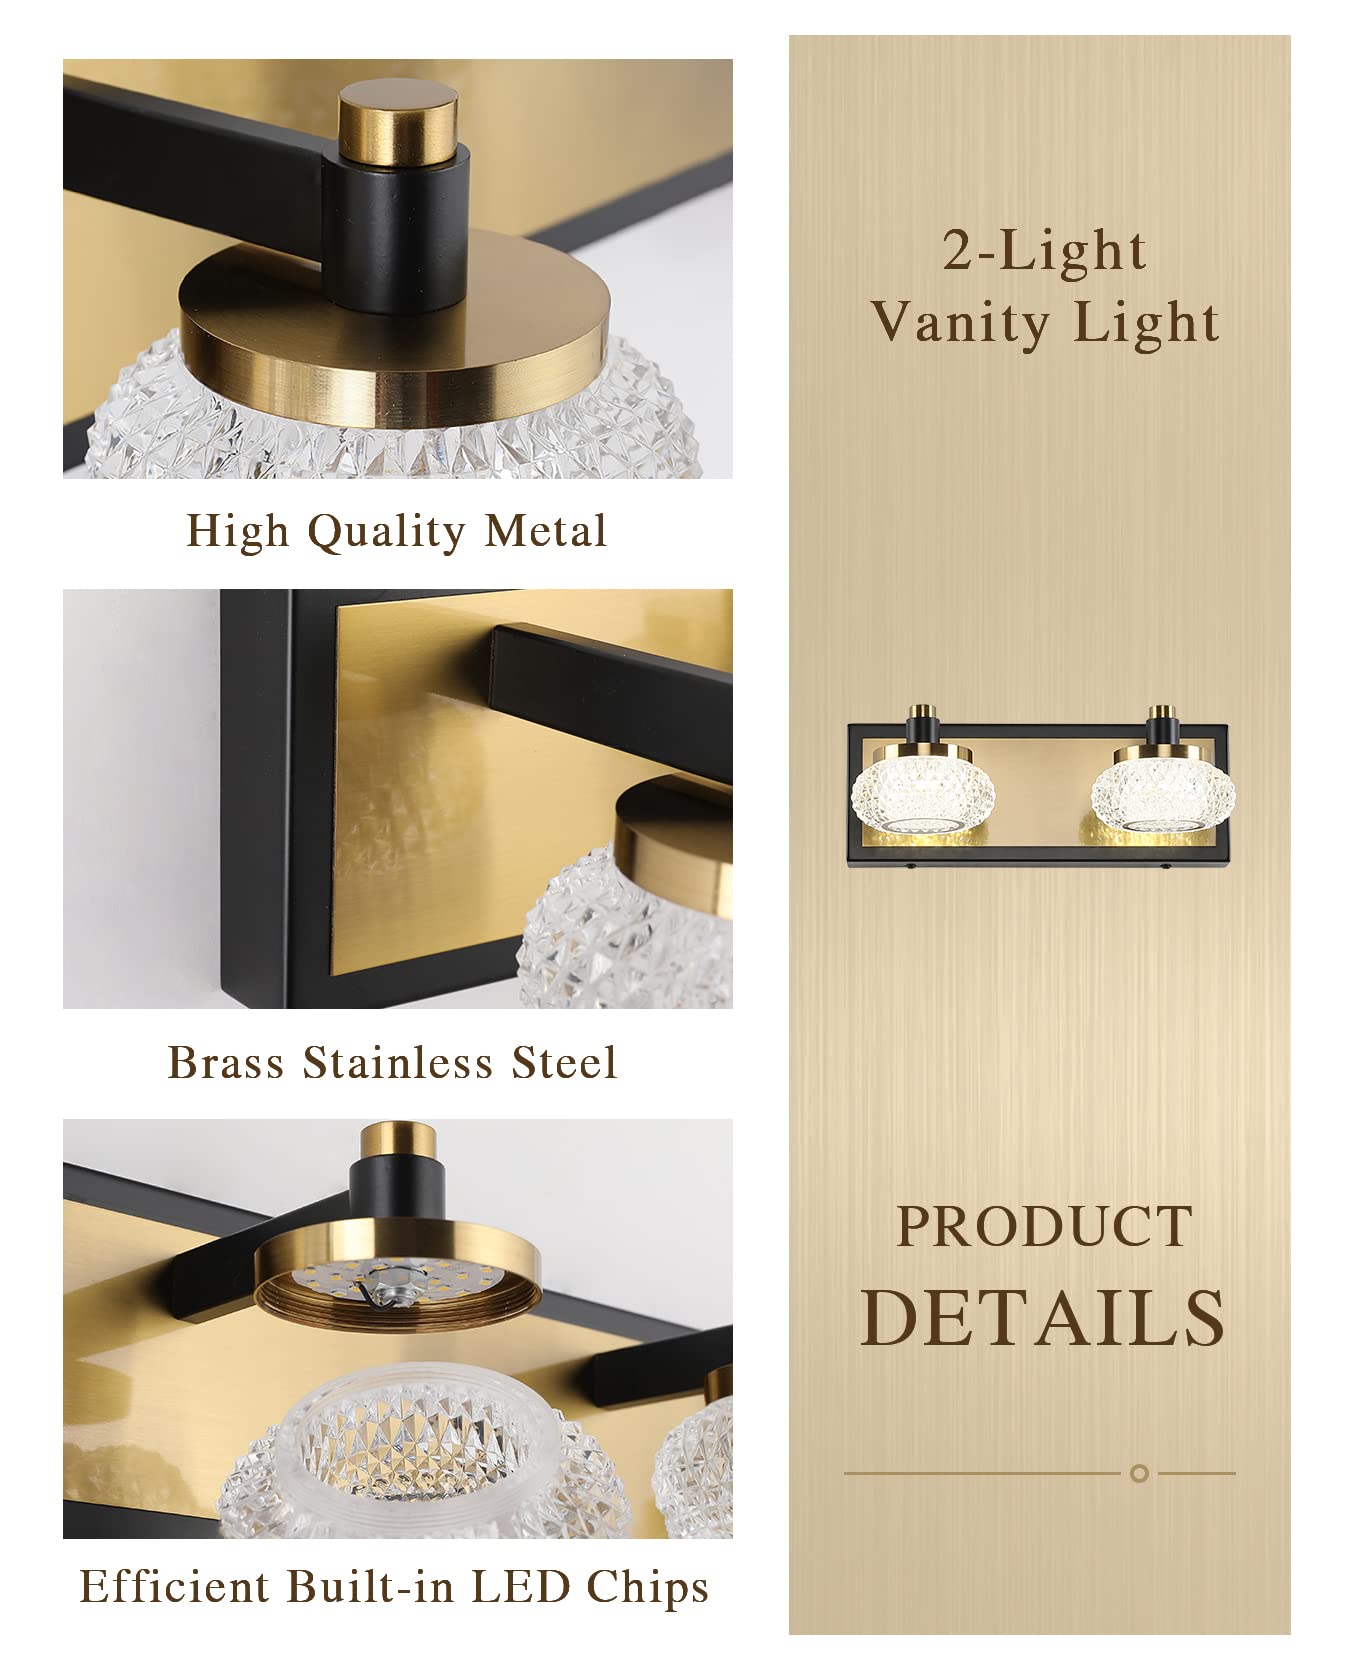 7Degobii 2-Light Bathroom Vanity Light Fixture Over Mirror Modern LED Acrylic Wall Lights for Bathroom 12" Inch Long Dimmable Black and Gold Color 4000K 10W 110V AC.